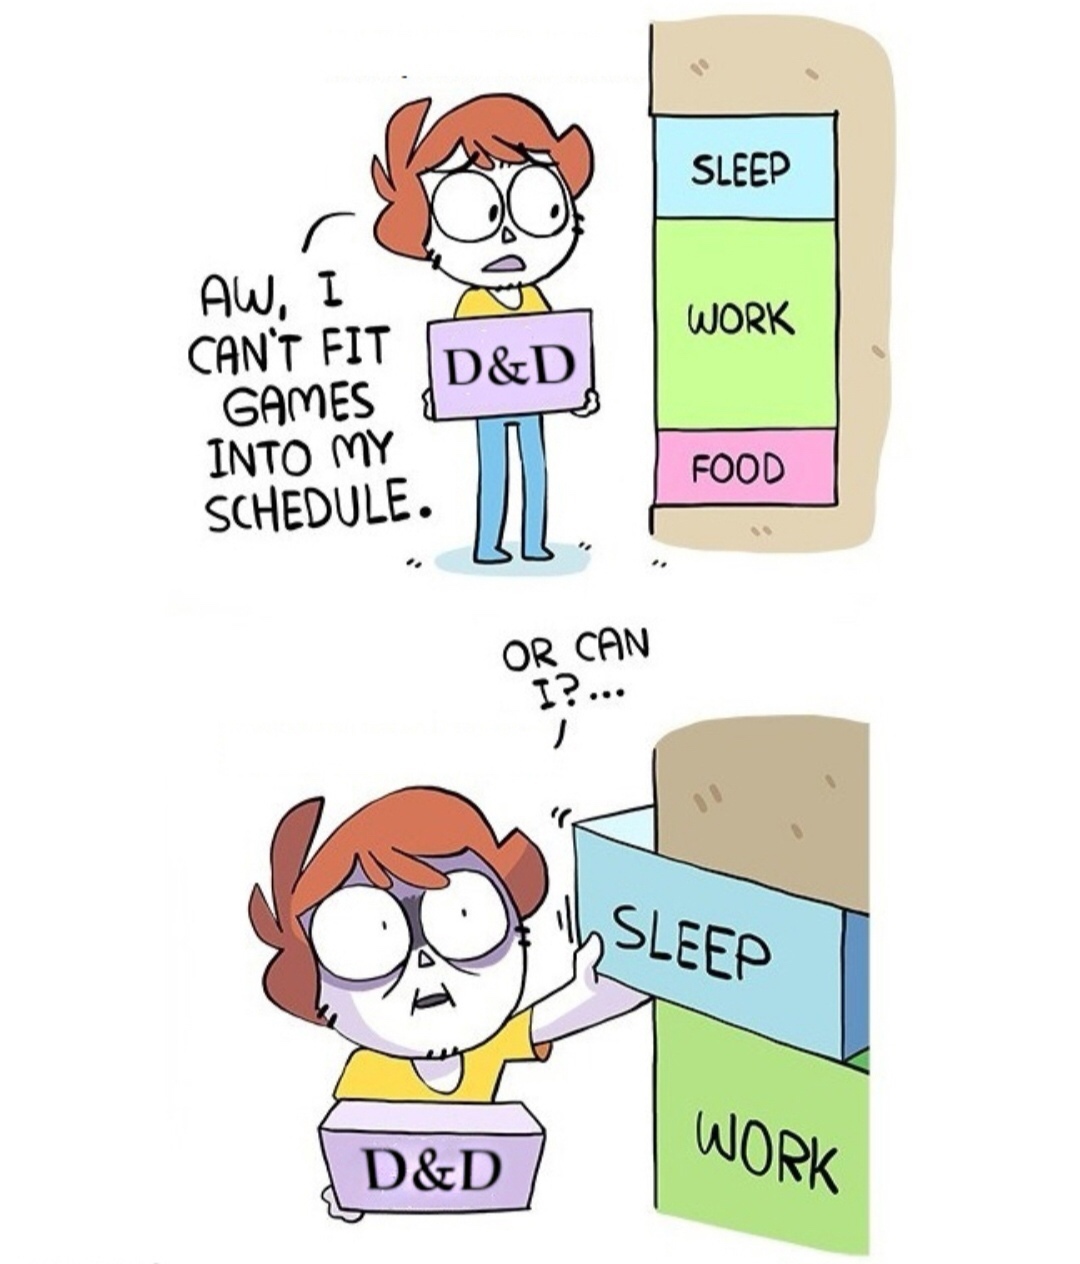 dungeons and dragons memes - Sleep Aw, I Can'T Fit |D&D Work 1 Games Into My Schedule. Food Or Can I?... Sleep Work &